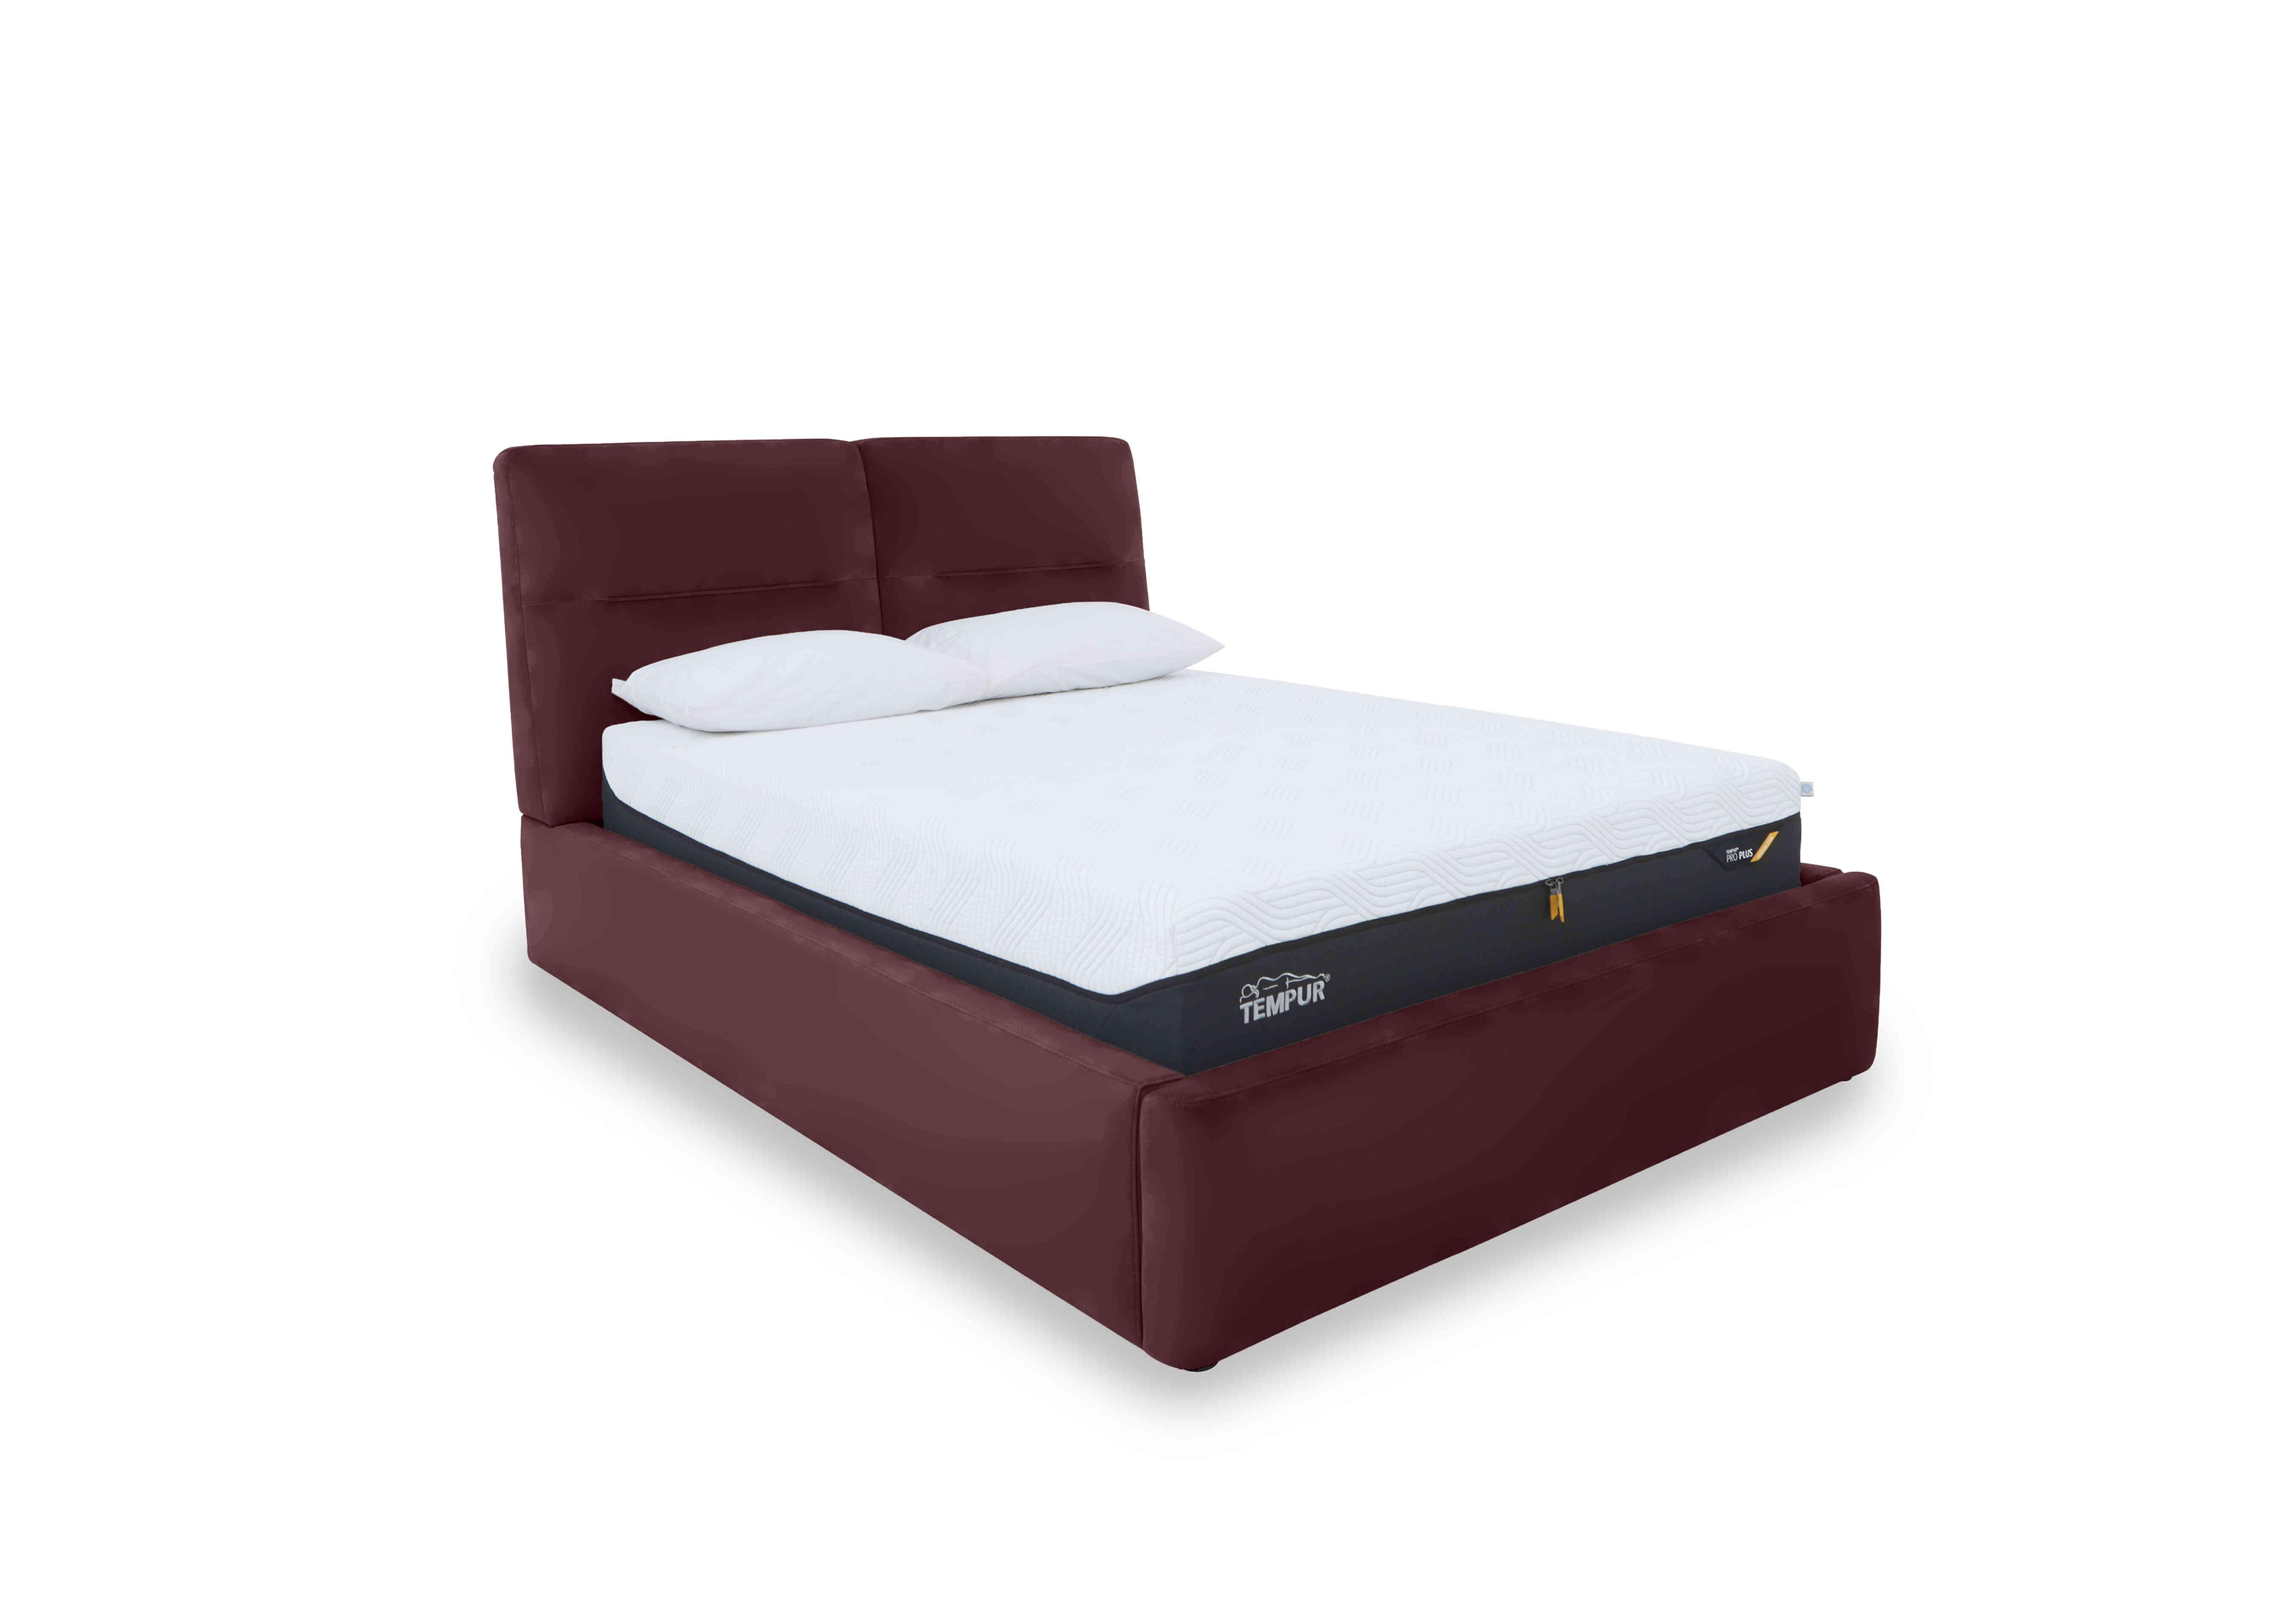 Stark Leather Manual Ottoman Bed Frame in Bv-035c Deep Red on Furniture Village